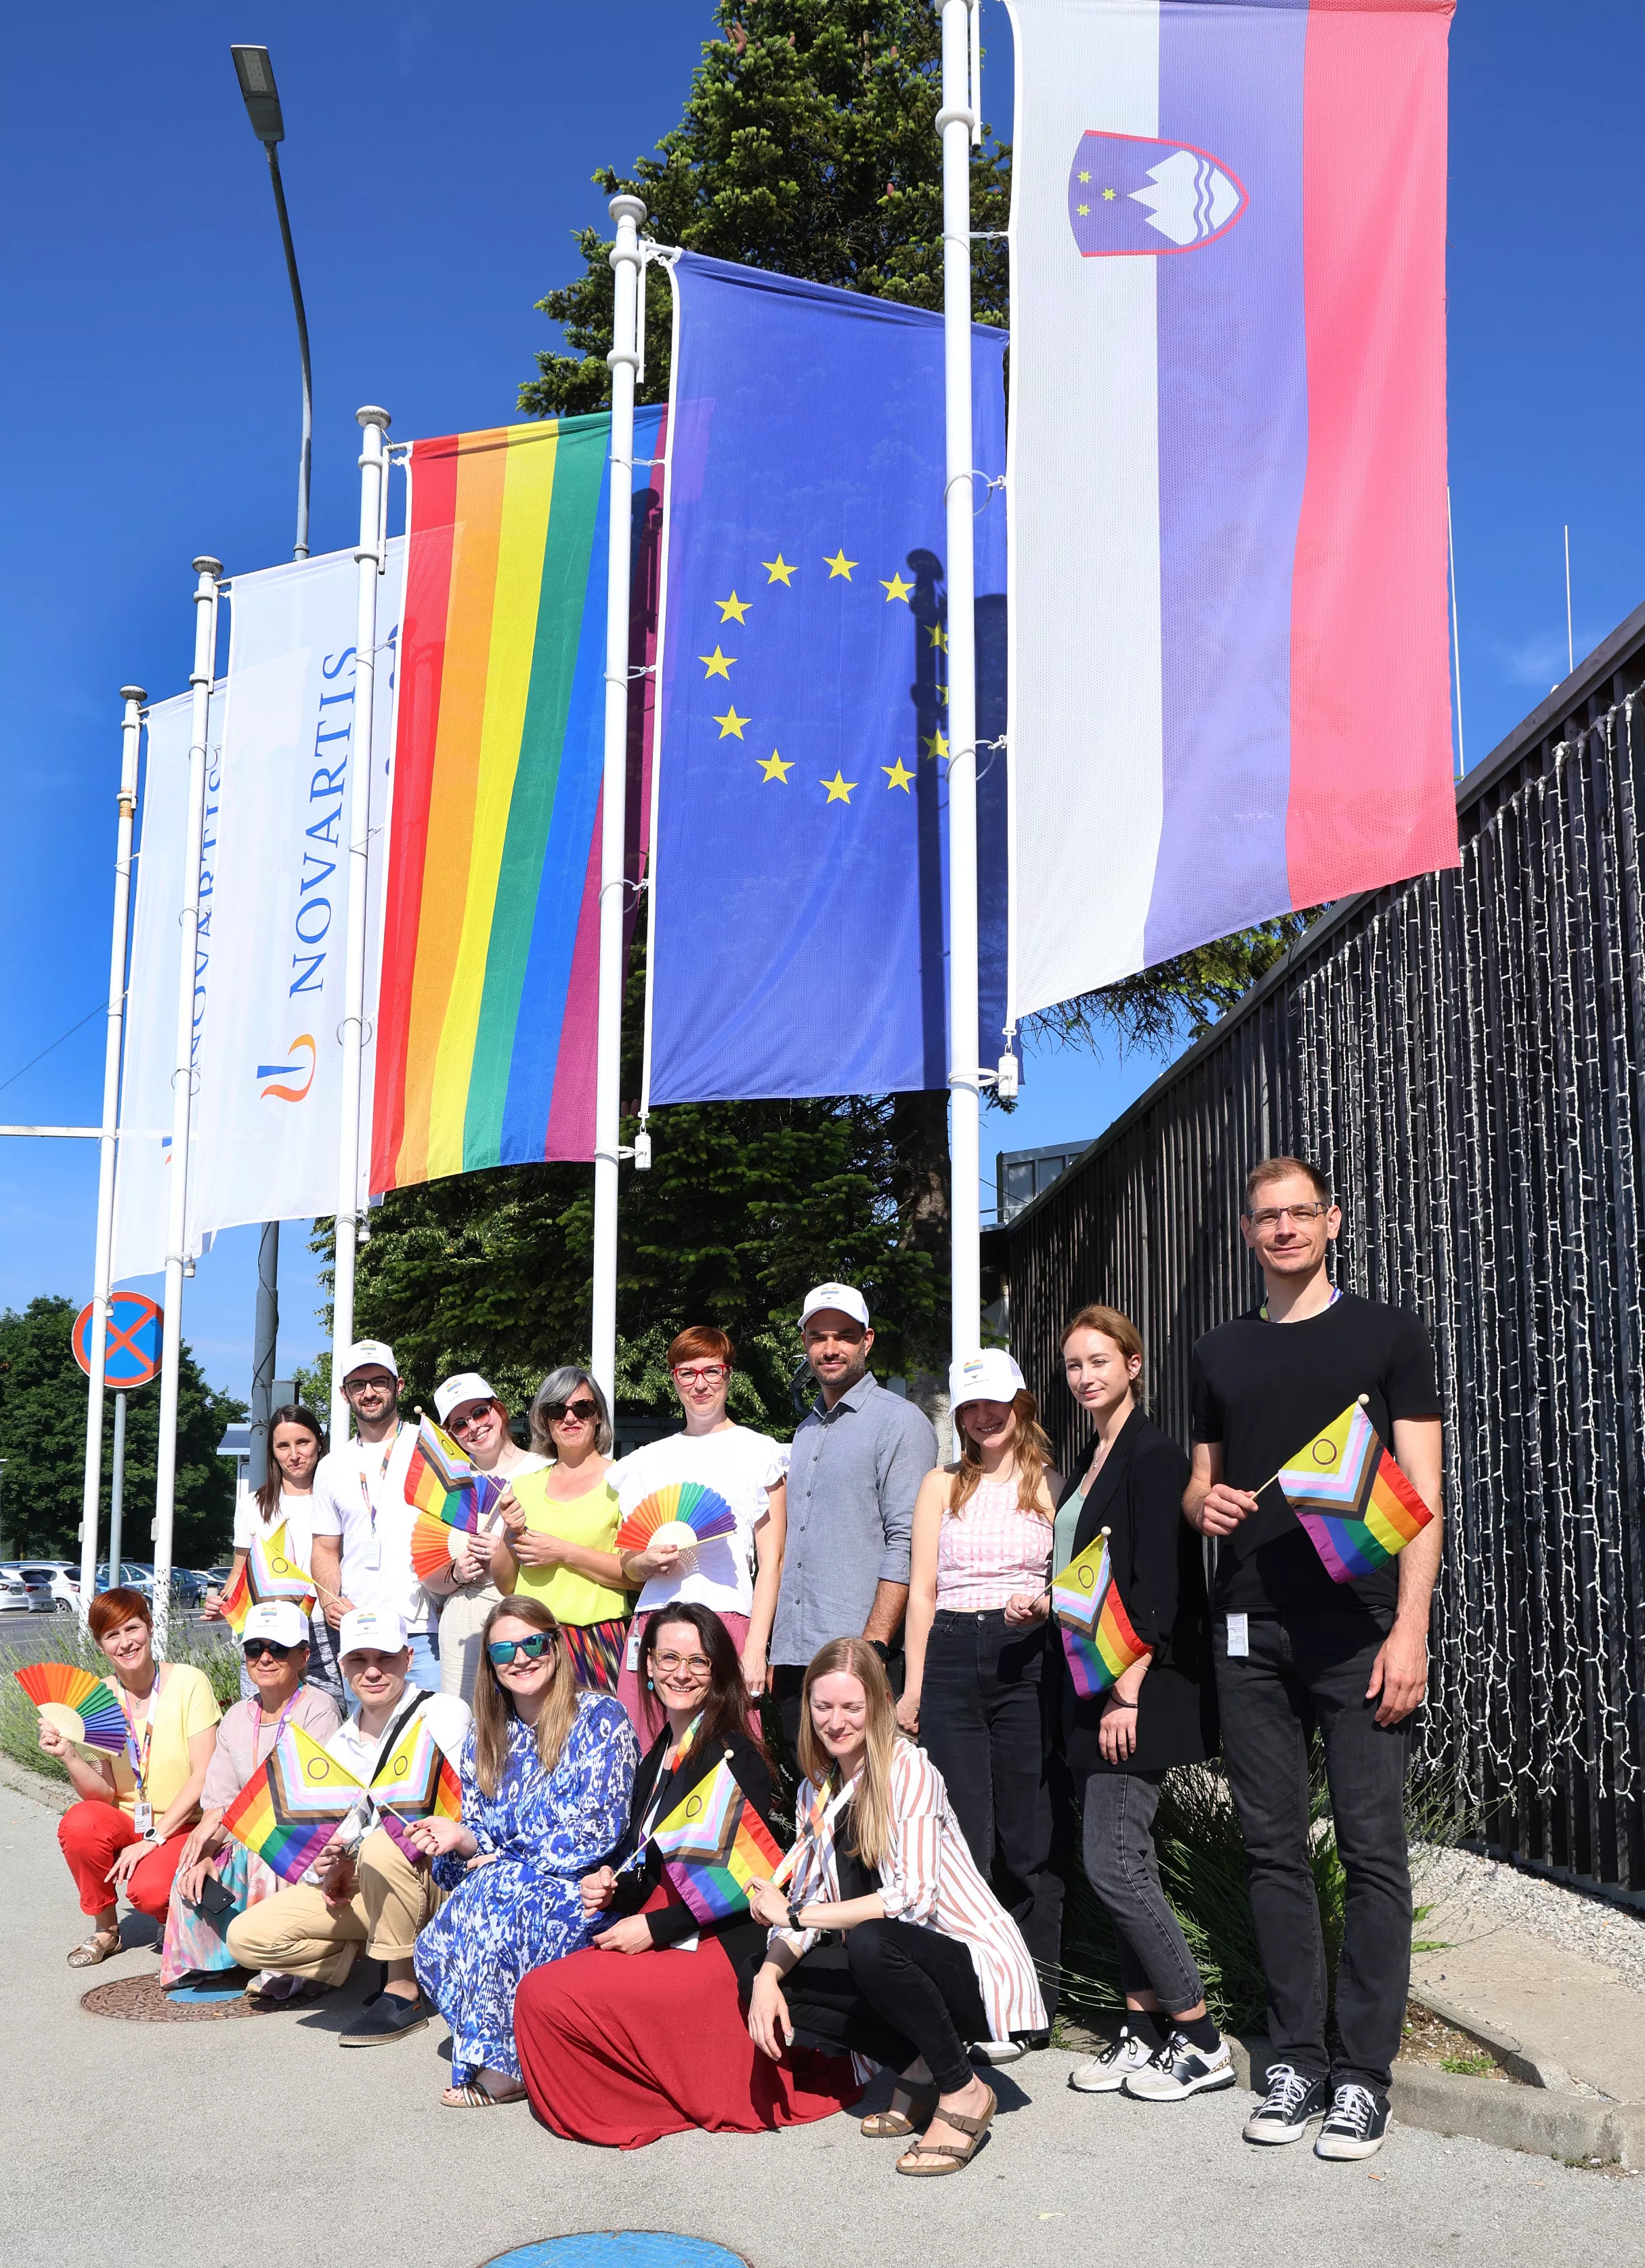 Raising the rainbow flag in front of the Novartis location in Mengš